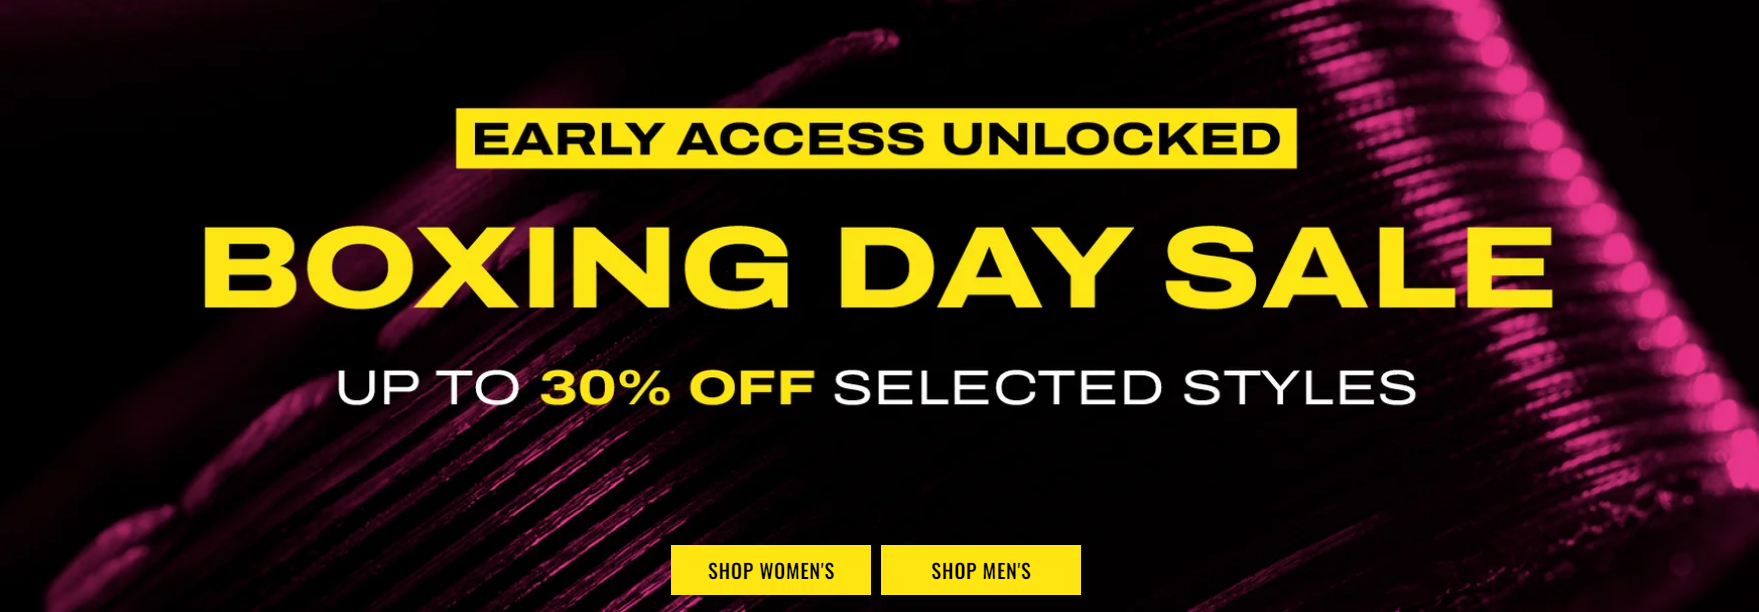 Boxing Day sale - Up to 30% OFF select vegan footwear styles at Dr Martens